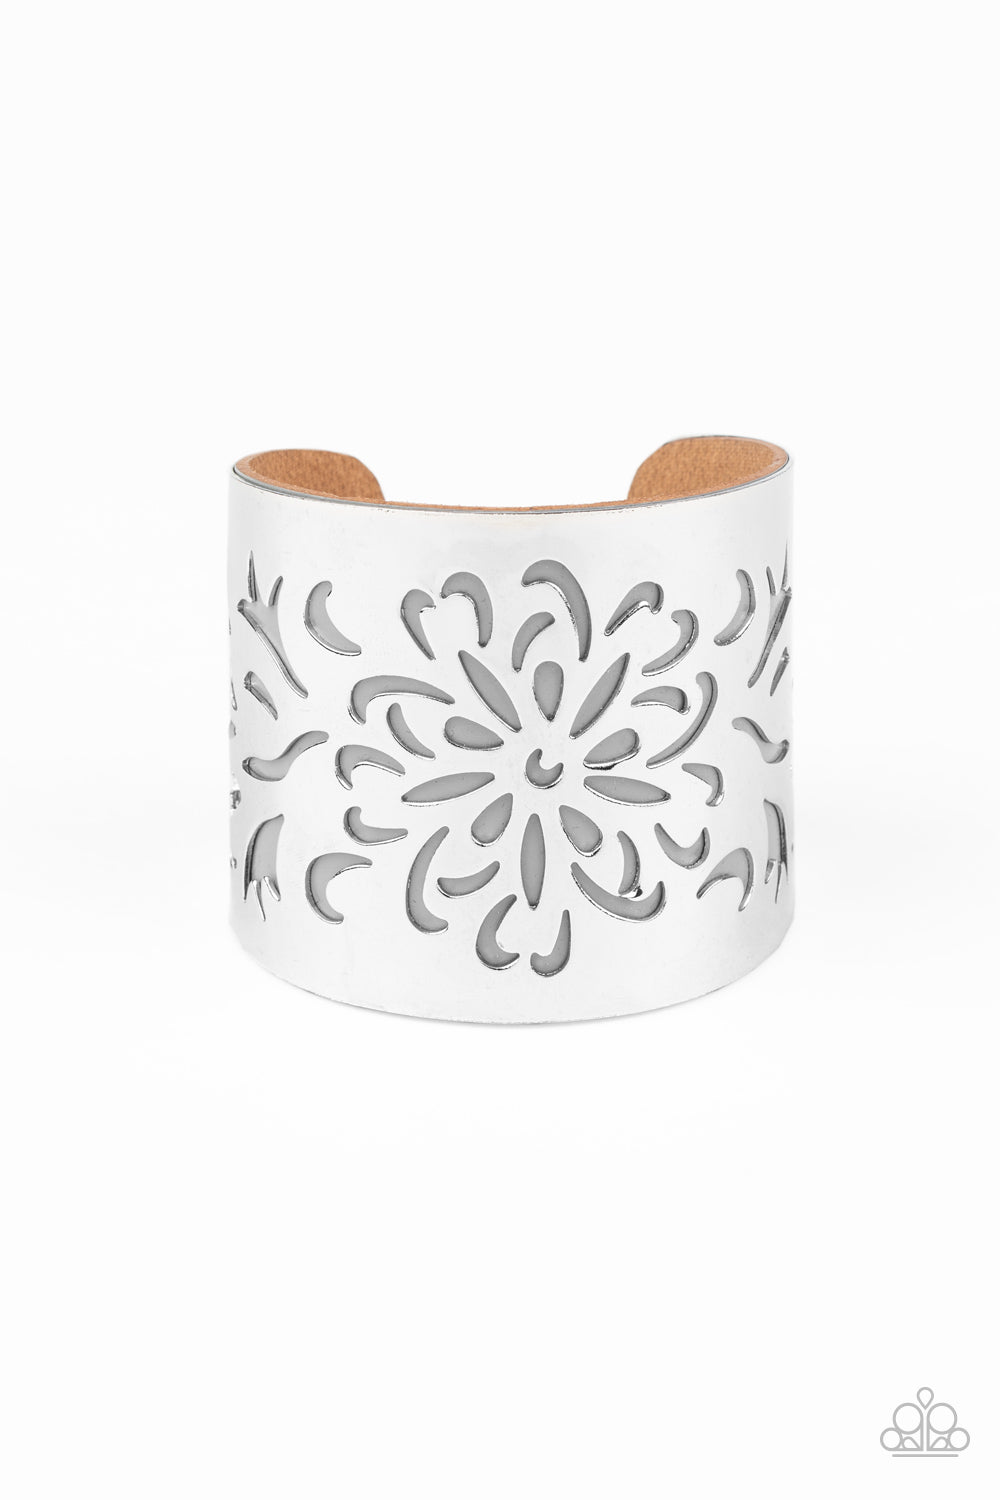 &lt;P&gt;A thick piece of Ash leather peeks out beneath an airy floral pattern stenciled into a thick silver cuff, creating a whimsical display around the wrist.&lt;/P&gt;  

&lt;P&gt; &lt;I&gt;Sold as one individual bracelet.&lt;/I&gt;  &lt;/P&gt;


&lt;img src=\&quot;https://d9b54x484lq62.cloudfront.net/paparazzi/shopping/images/517_tag150x115_1.png\&quot; alt=\&quot;New Kit\&quot; align=\&quot;middle\&quot; height=\&quot;50\&quot; width=\&quot;50\&quot;/&gt;